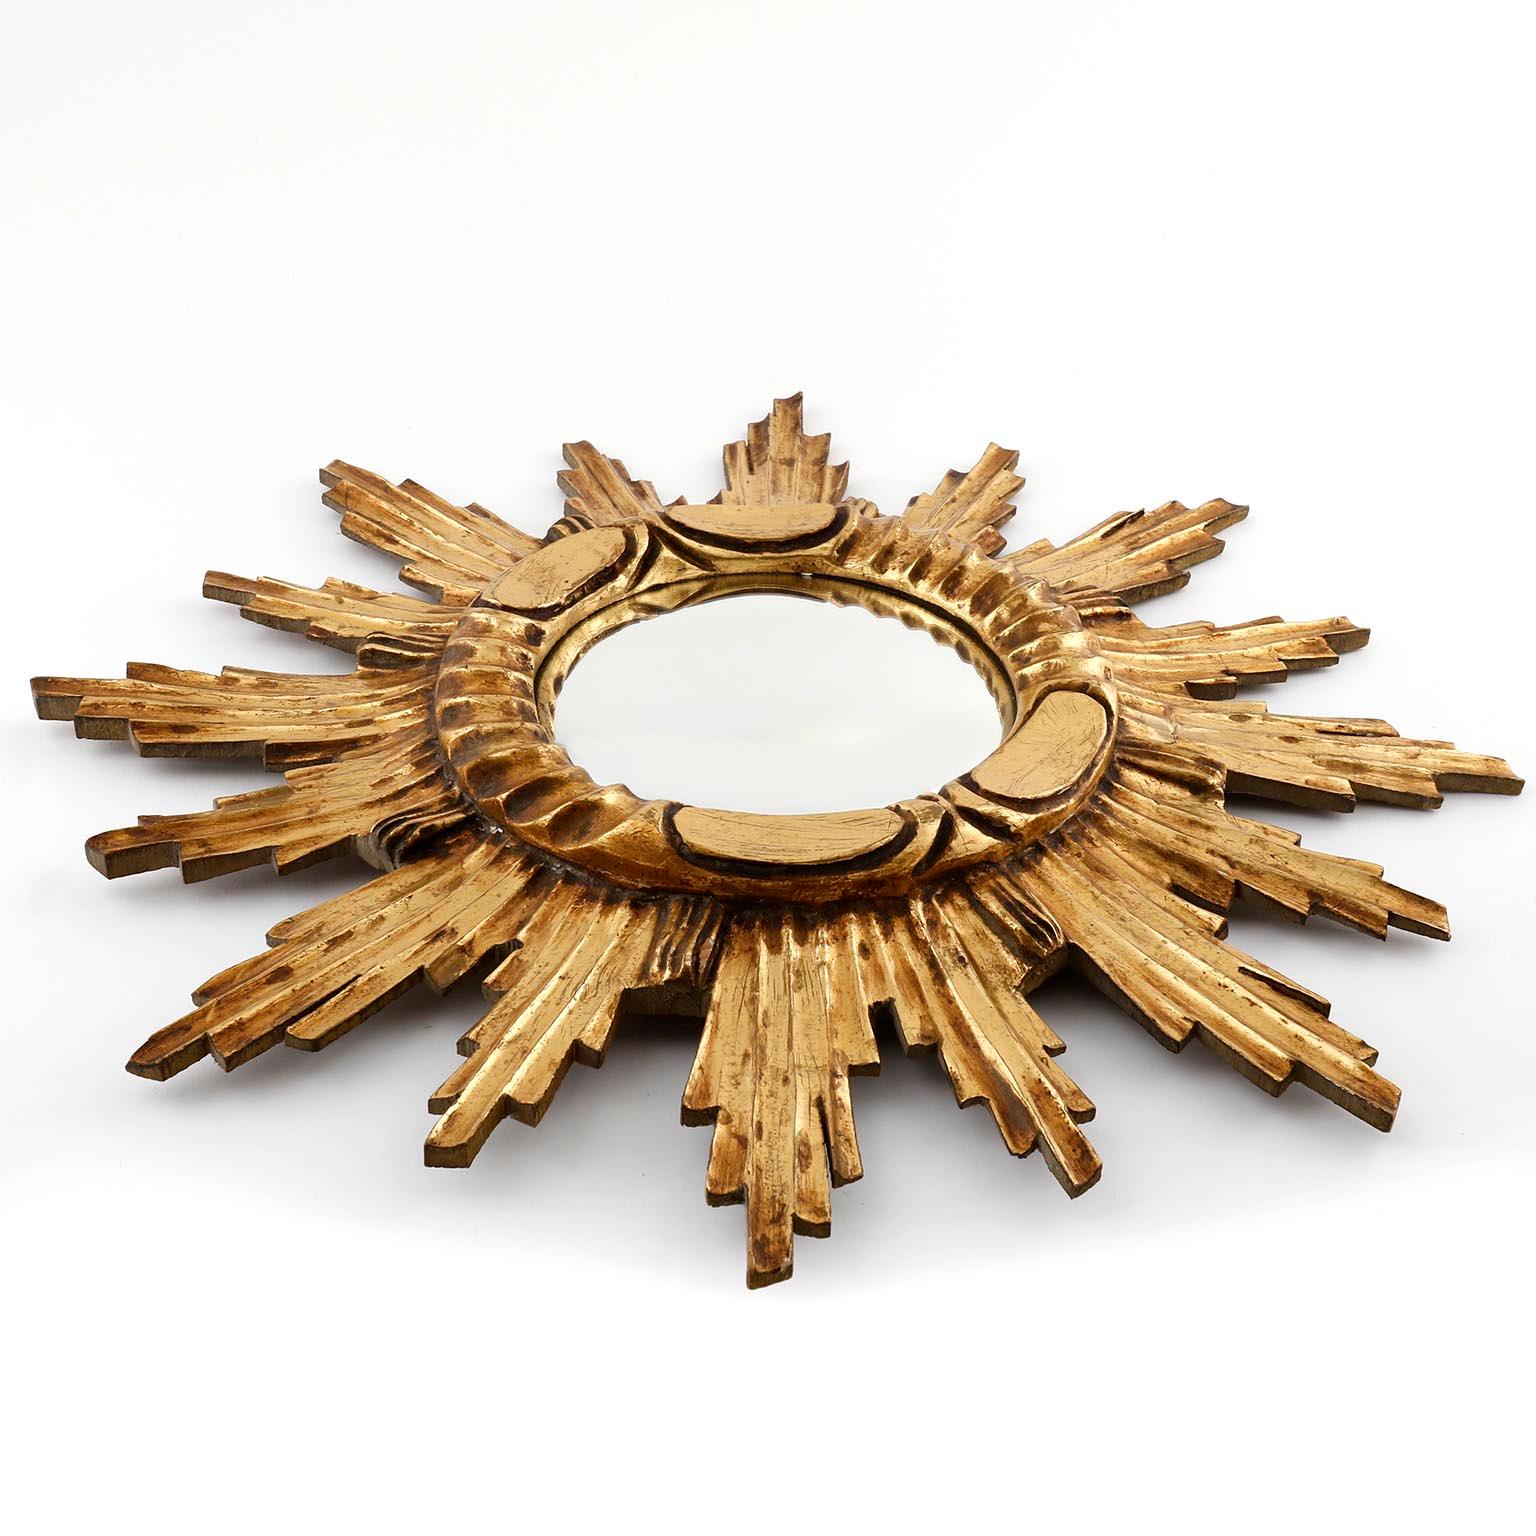 A beautiful sunburst mirror manufactured in Italy in early 20th century.
It is made of hand carved giltwood and a convex shaped polished metal (probably nickeled) metal mirror.
It has a lovely original vintage patina.